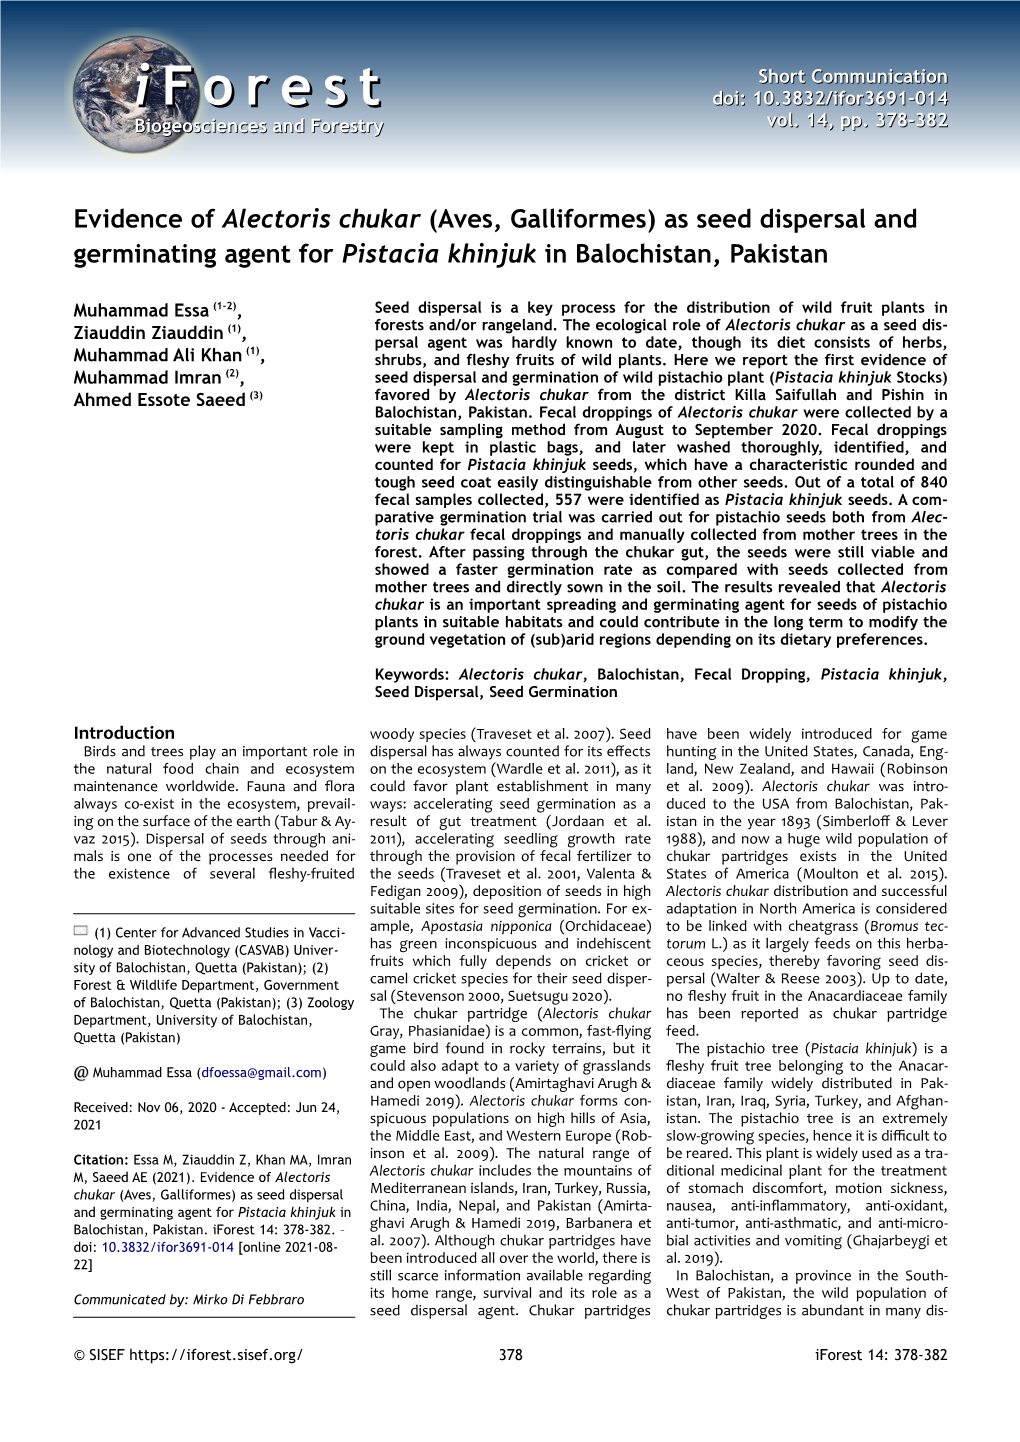 Evidence of Alectoris Chukar (Aves, Galliformes) As Seed Dispersal and Germinating Agent for Pistacia Khinjuk in Balochistan, Pakistan